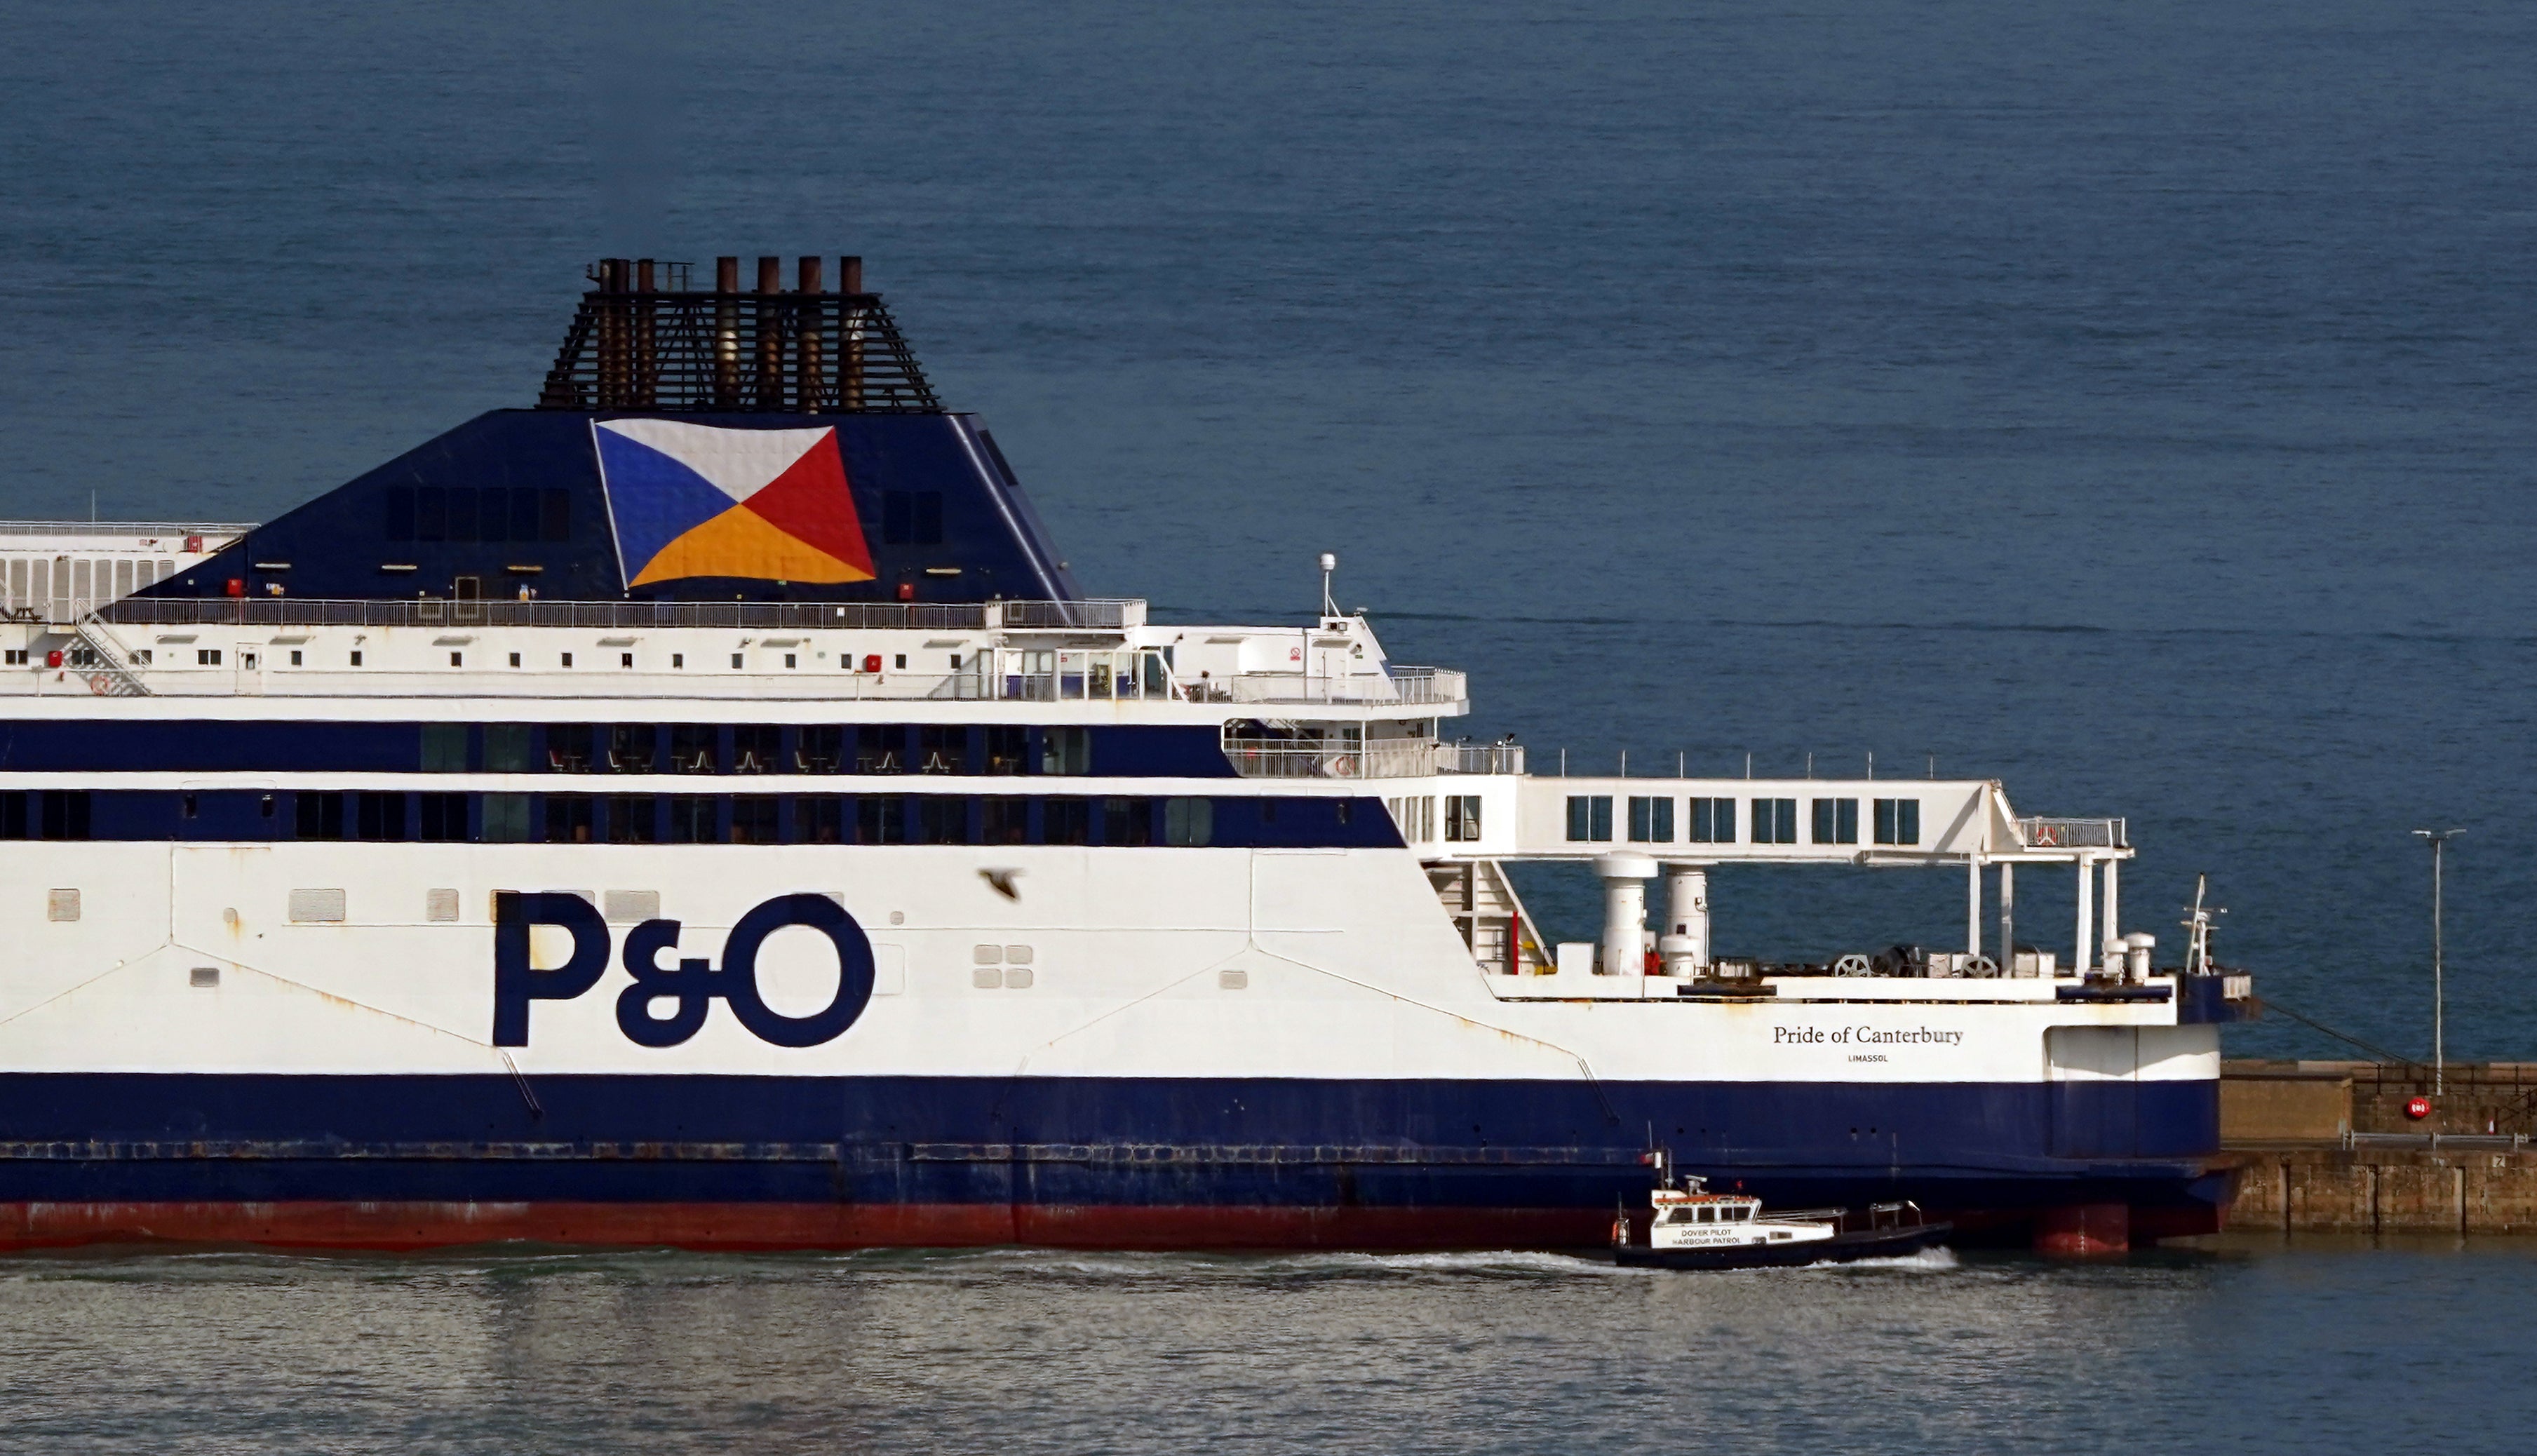 The boss of P&O Ferries has insisted he will not reverse the decision to sack nearly 800 seafarers despite being given ‘one further opportunity’ by transport secretary Grant Shapps